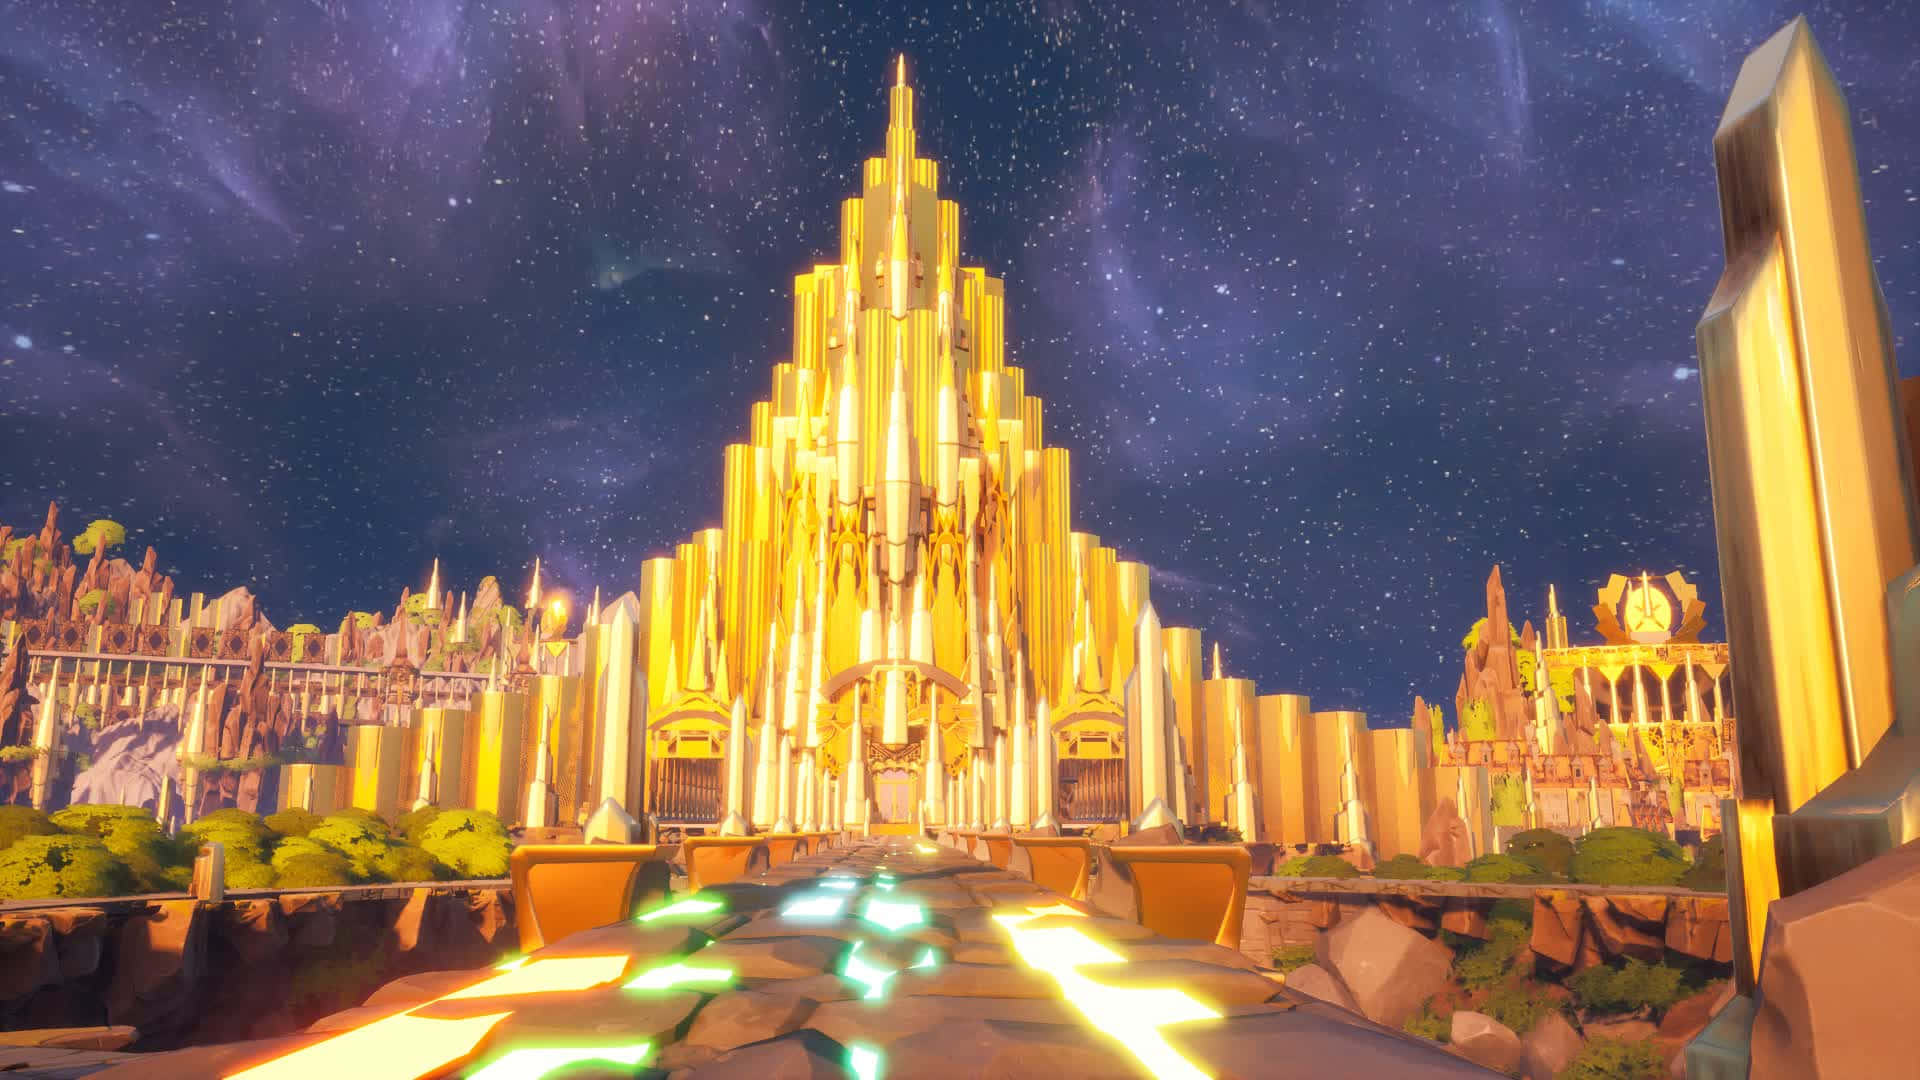 Majestic Overview Of Asgard City In Twilight Wallpaper